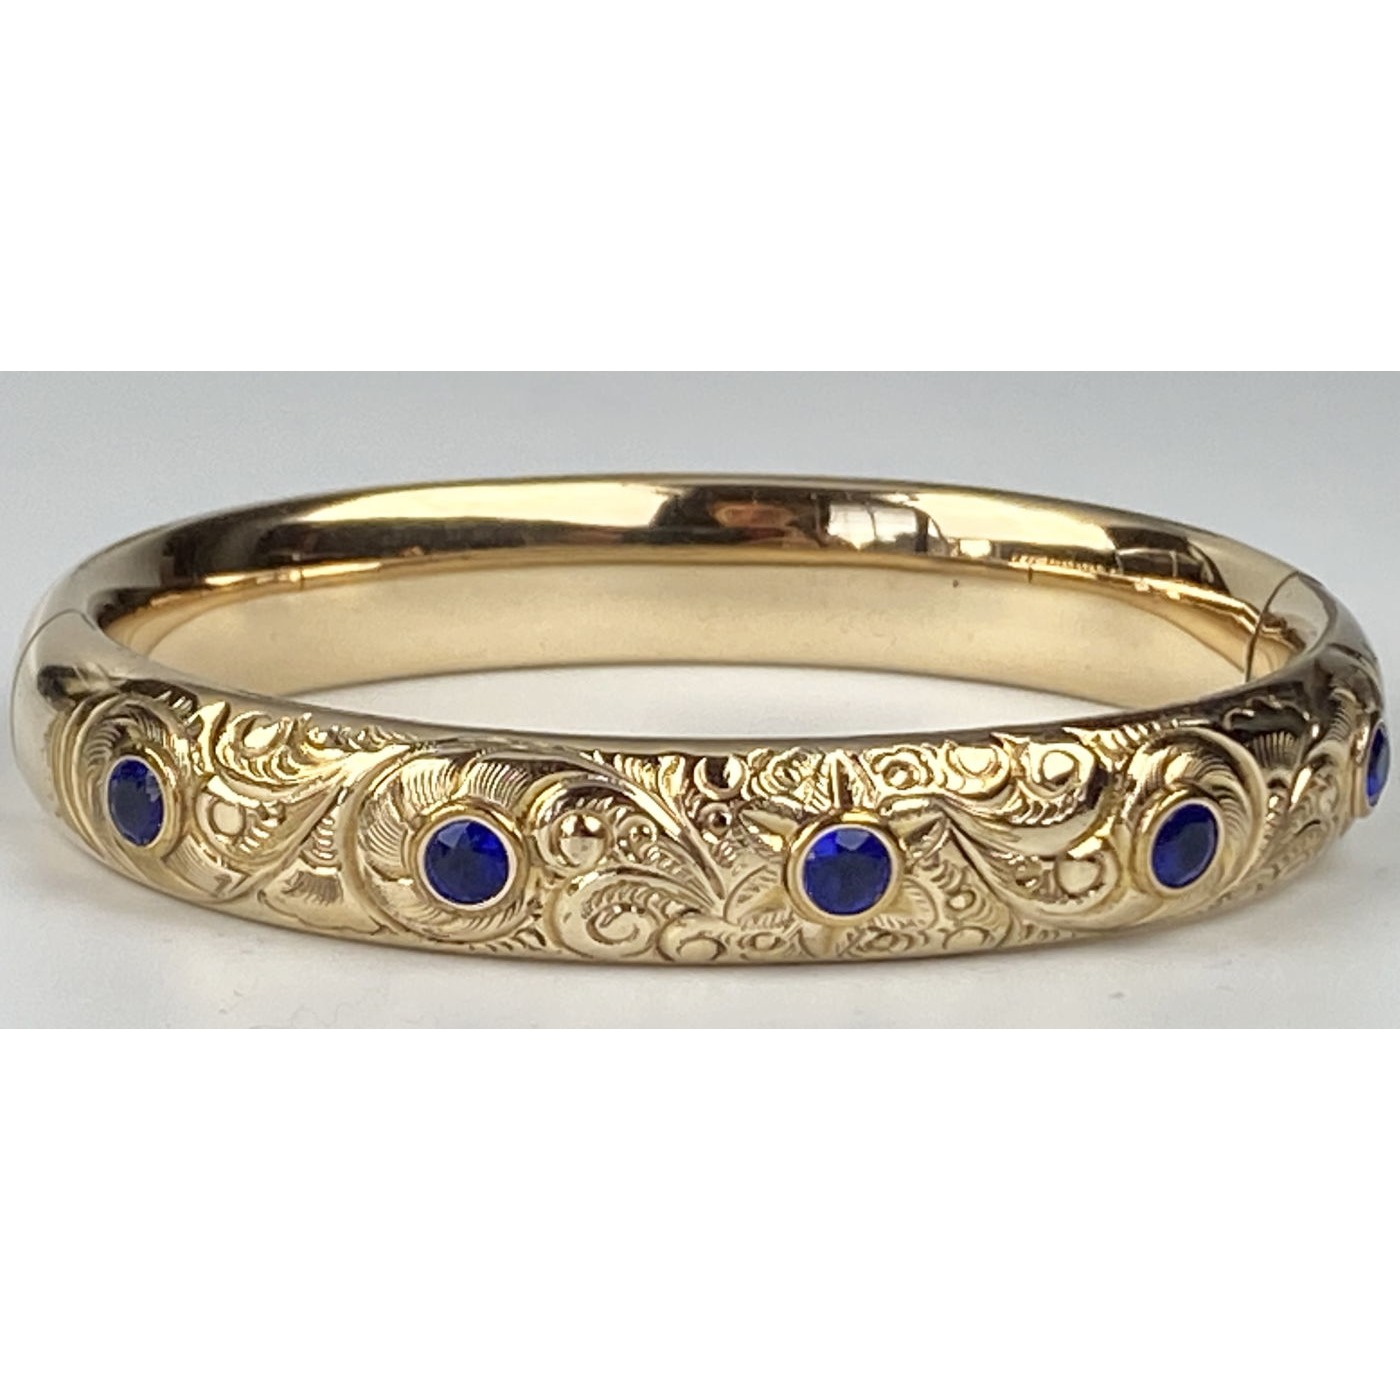 Deeply Engraved Engagement Bangle with Deep Blue Stones